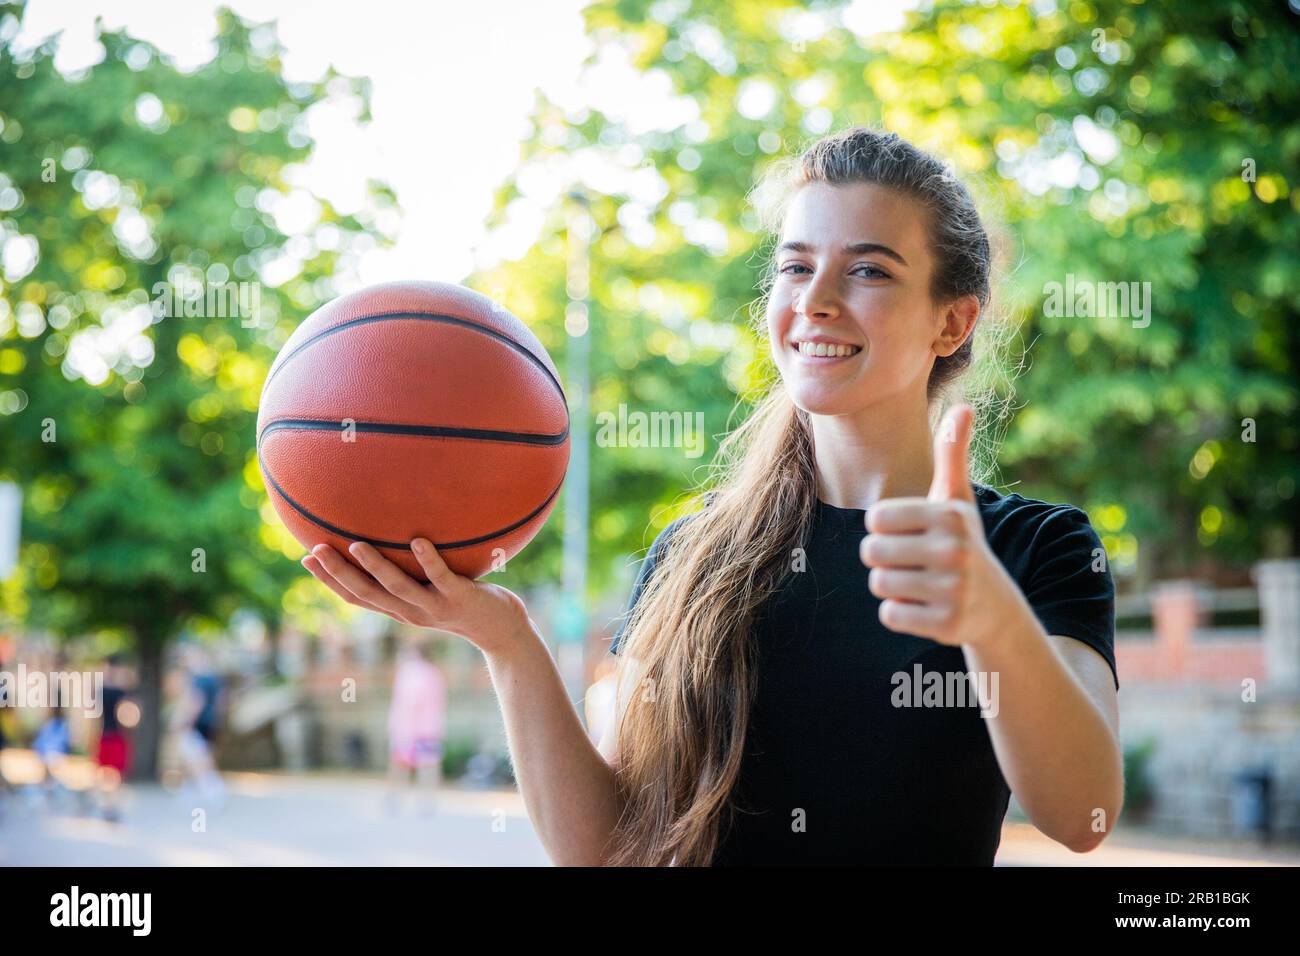 A basketball player with a basketball in her hand shows the thumbs up smiling Stock Photo